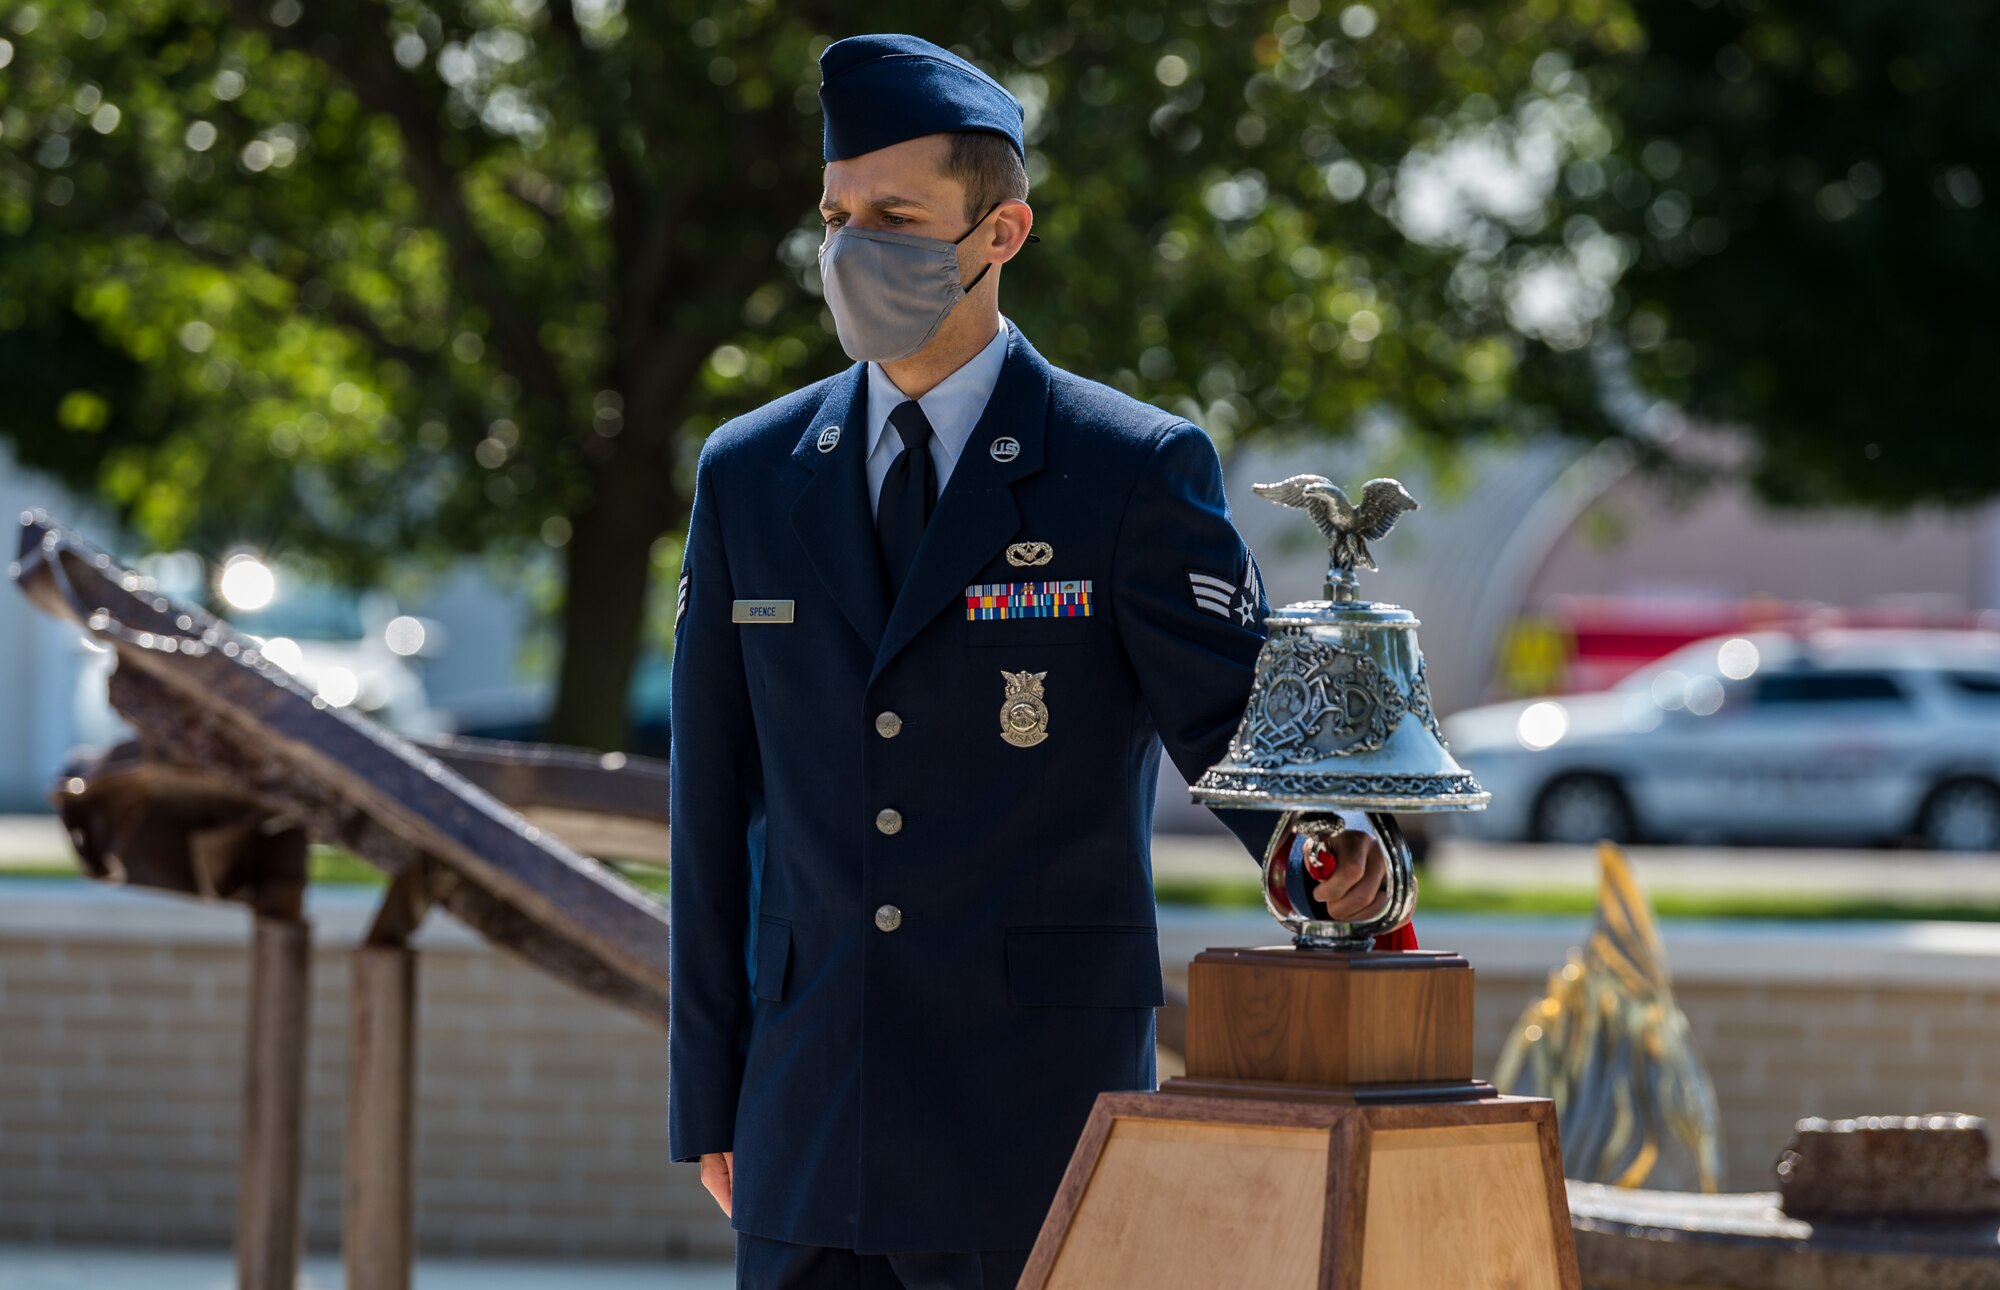 Senior Airman Kyle Spence, 436th Civil Engineer Squadron fire department operator, performed  “Striking the Four Fives” during the 20th Anniversary 9/11  Remembrance Ceremony held at the Air Mobility Command Museum’s 9/11 Memorial on Dover Air Force Base, Delaware, Sept. 11, 2021. Spence rang the bell five times, for four sets, to honor the 343 firefighters who died while responding to the terrorist attacks on the World Trade Center in New York Sept. 11, 2001. (U.S. Air Force photo by Roland Balik)